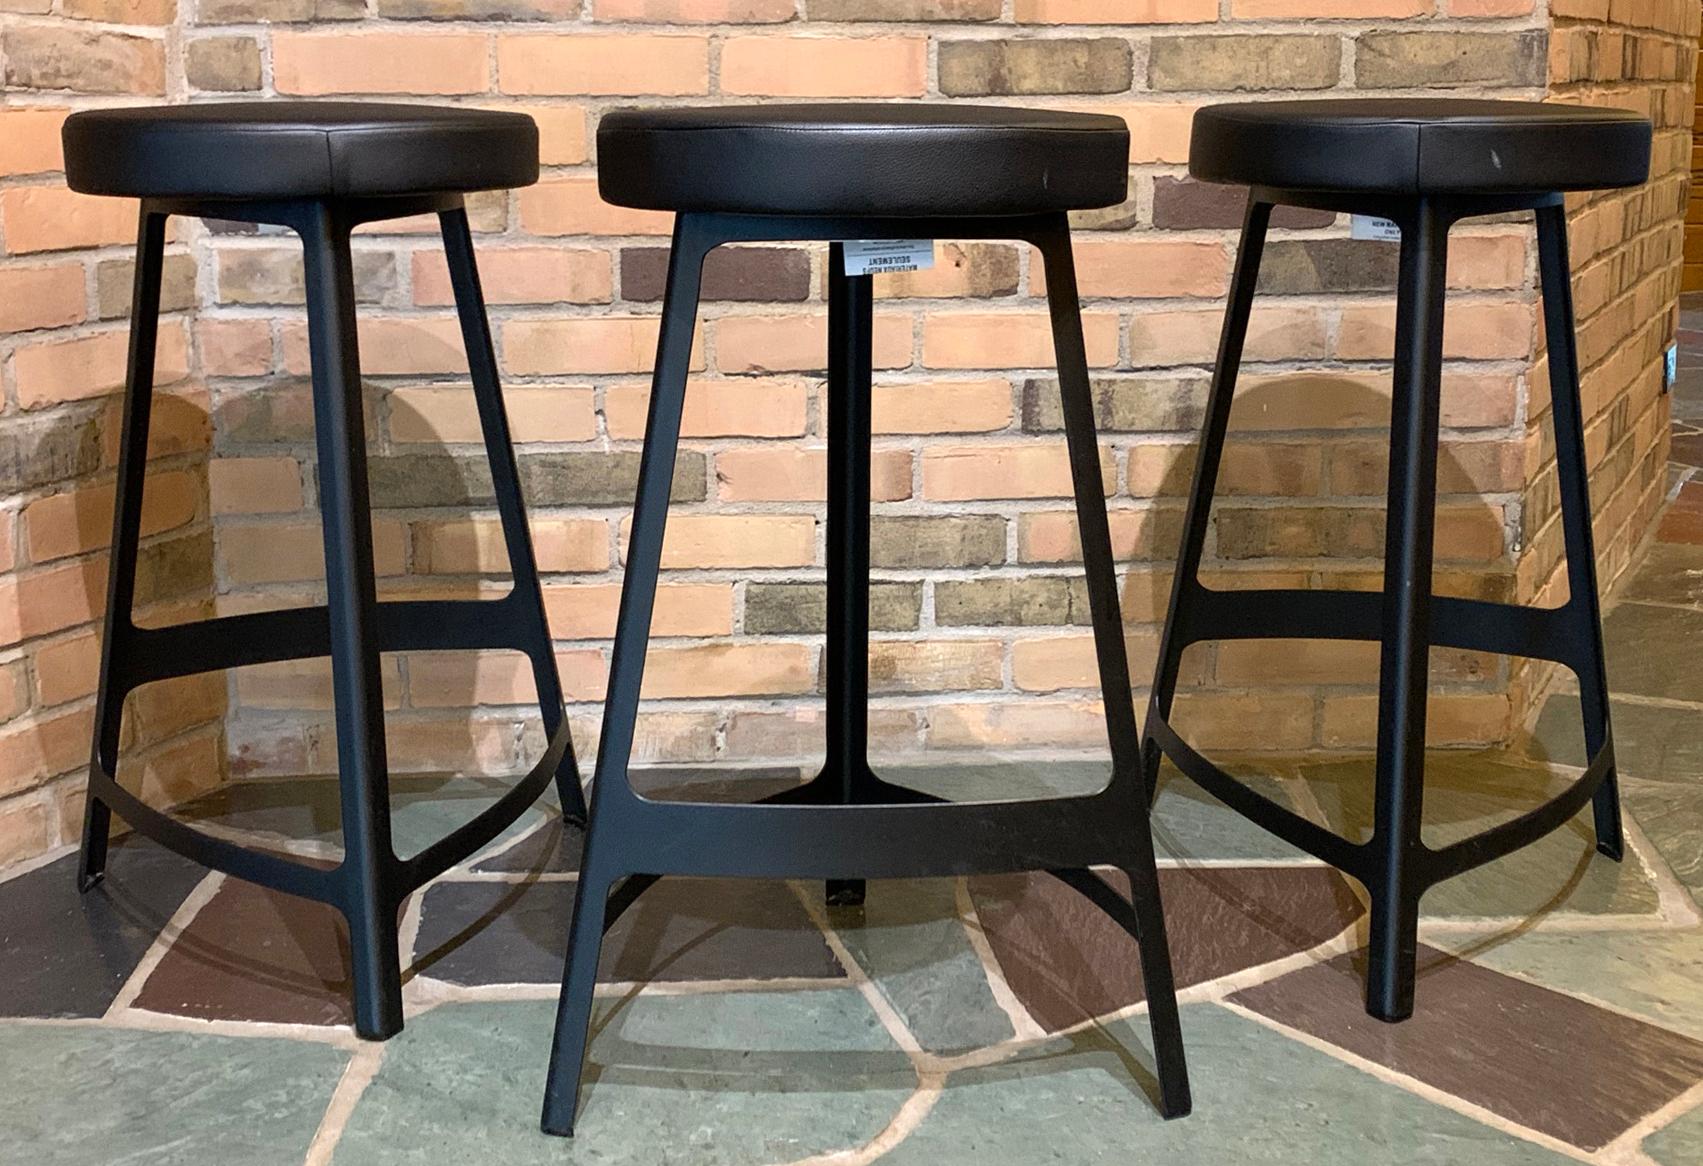 For your consideration is a terrific set of three, metal bar stools, with foot rests, by Sean Dix Factory. In excellent condition. The dimensions are 17